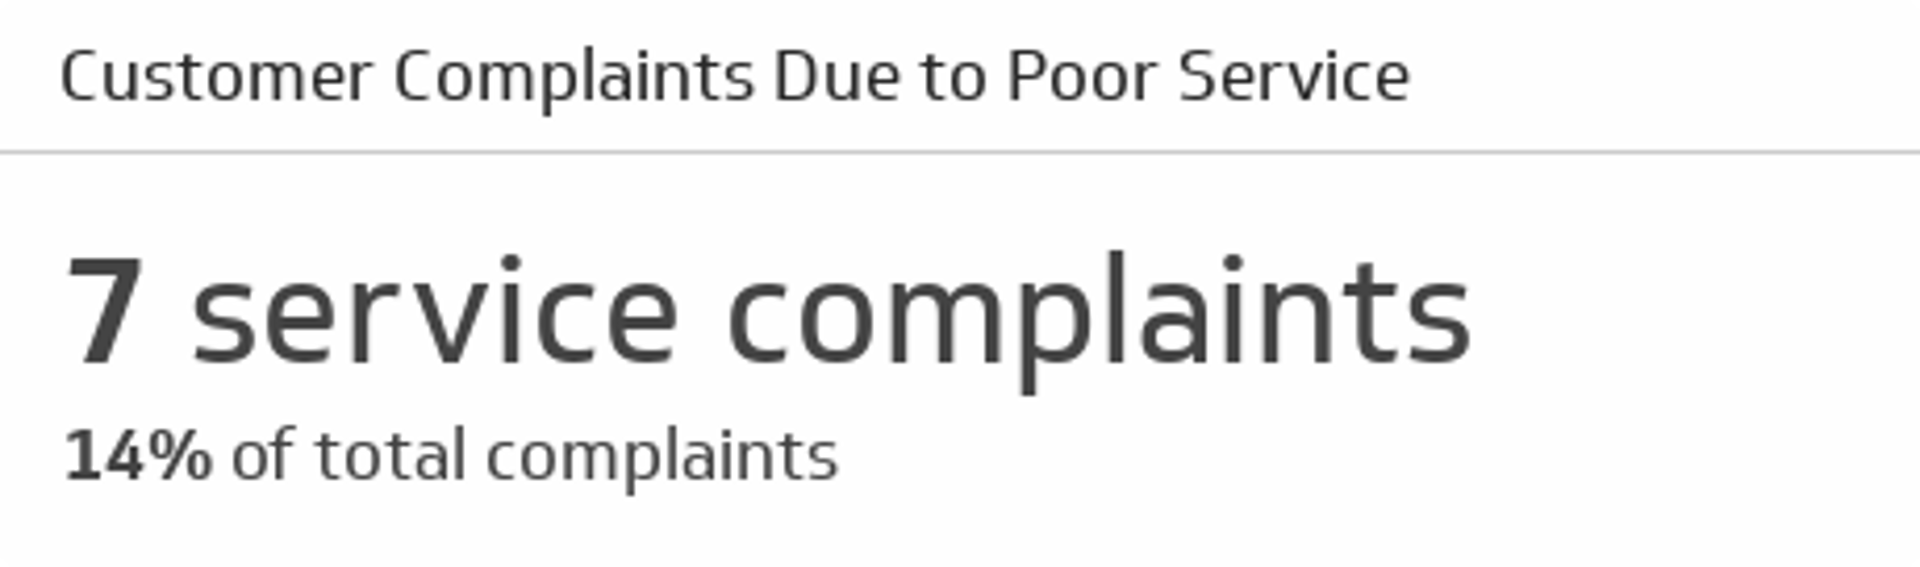 Support KPI Examples - Customer Complaints Due to Poor Service or Product Quality Metric